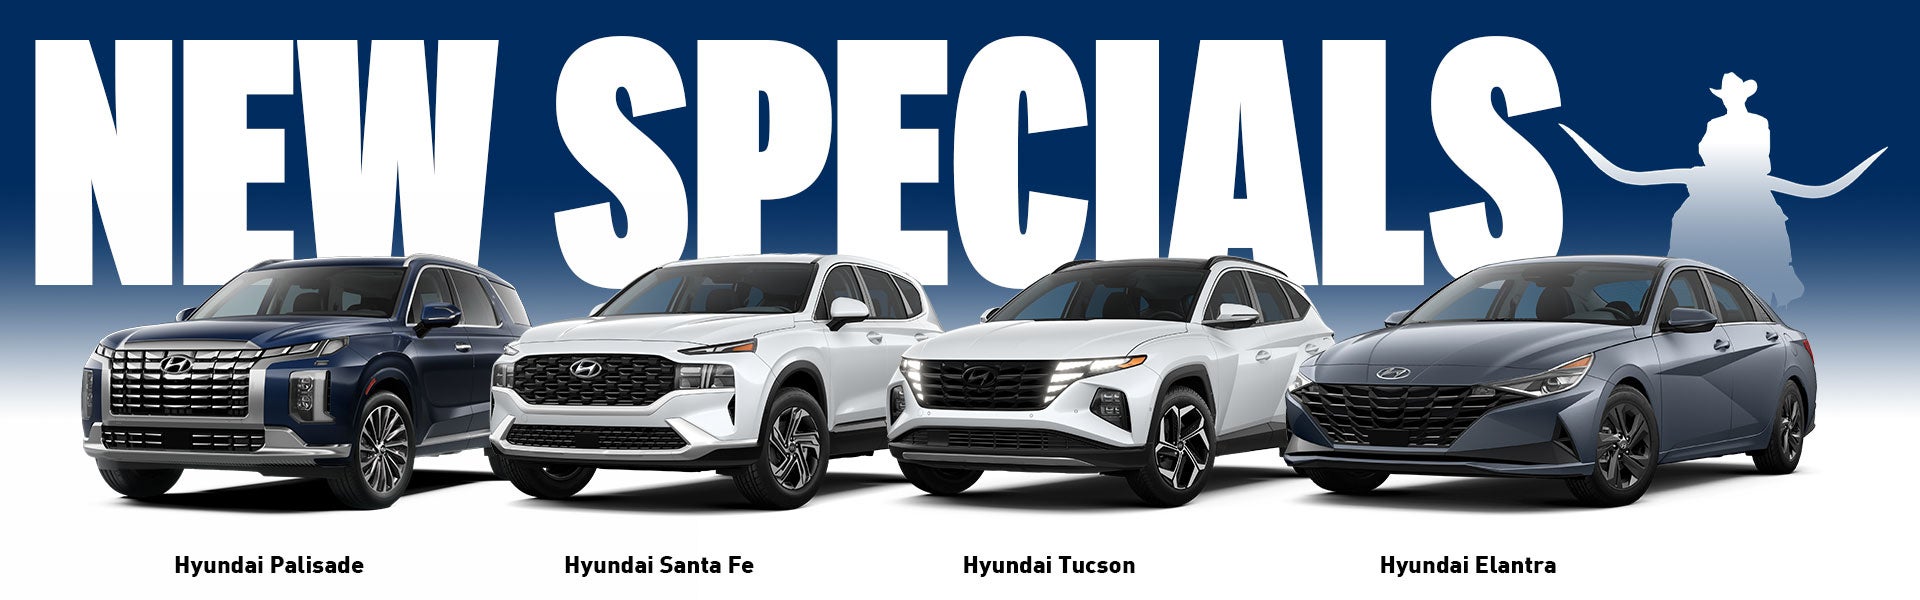 New Hyundai Inventory Arriving Daily